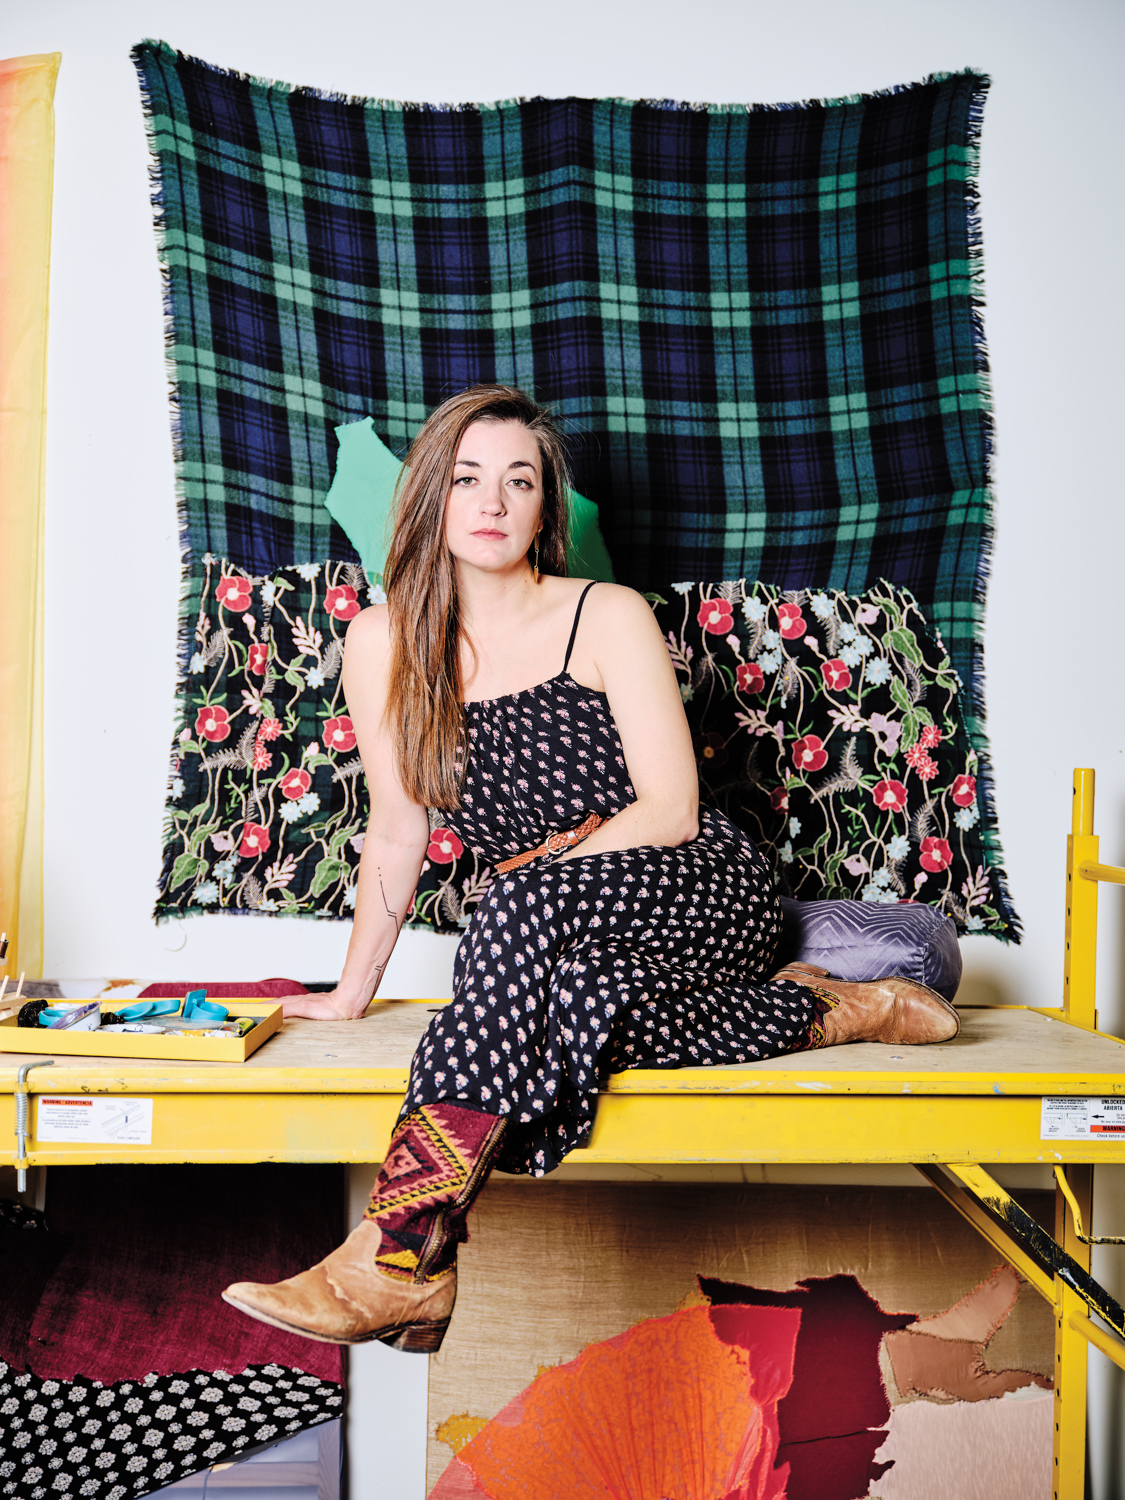 portrait of artist Sarah Darlene Palmeri on a yellow bench with fabric hung behind her